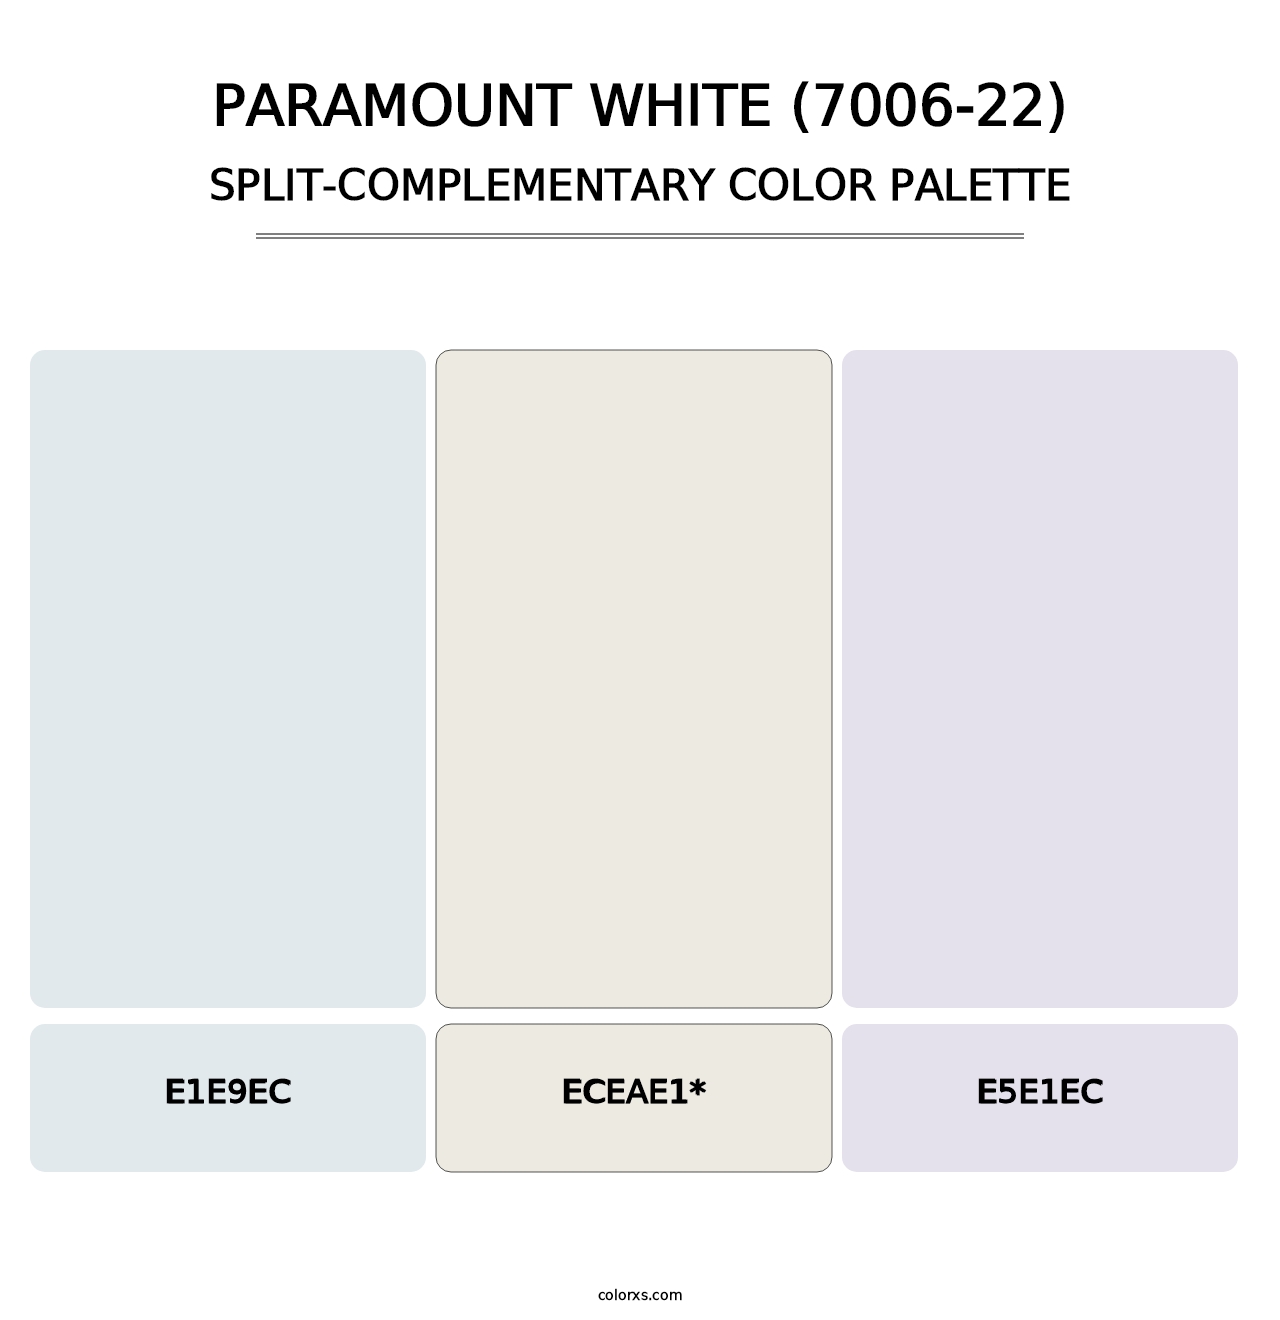 Paramount White (7006-22) - Split-Complementary Color Palette